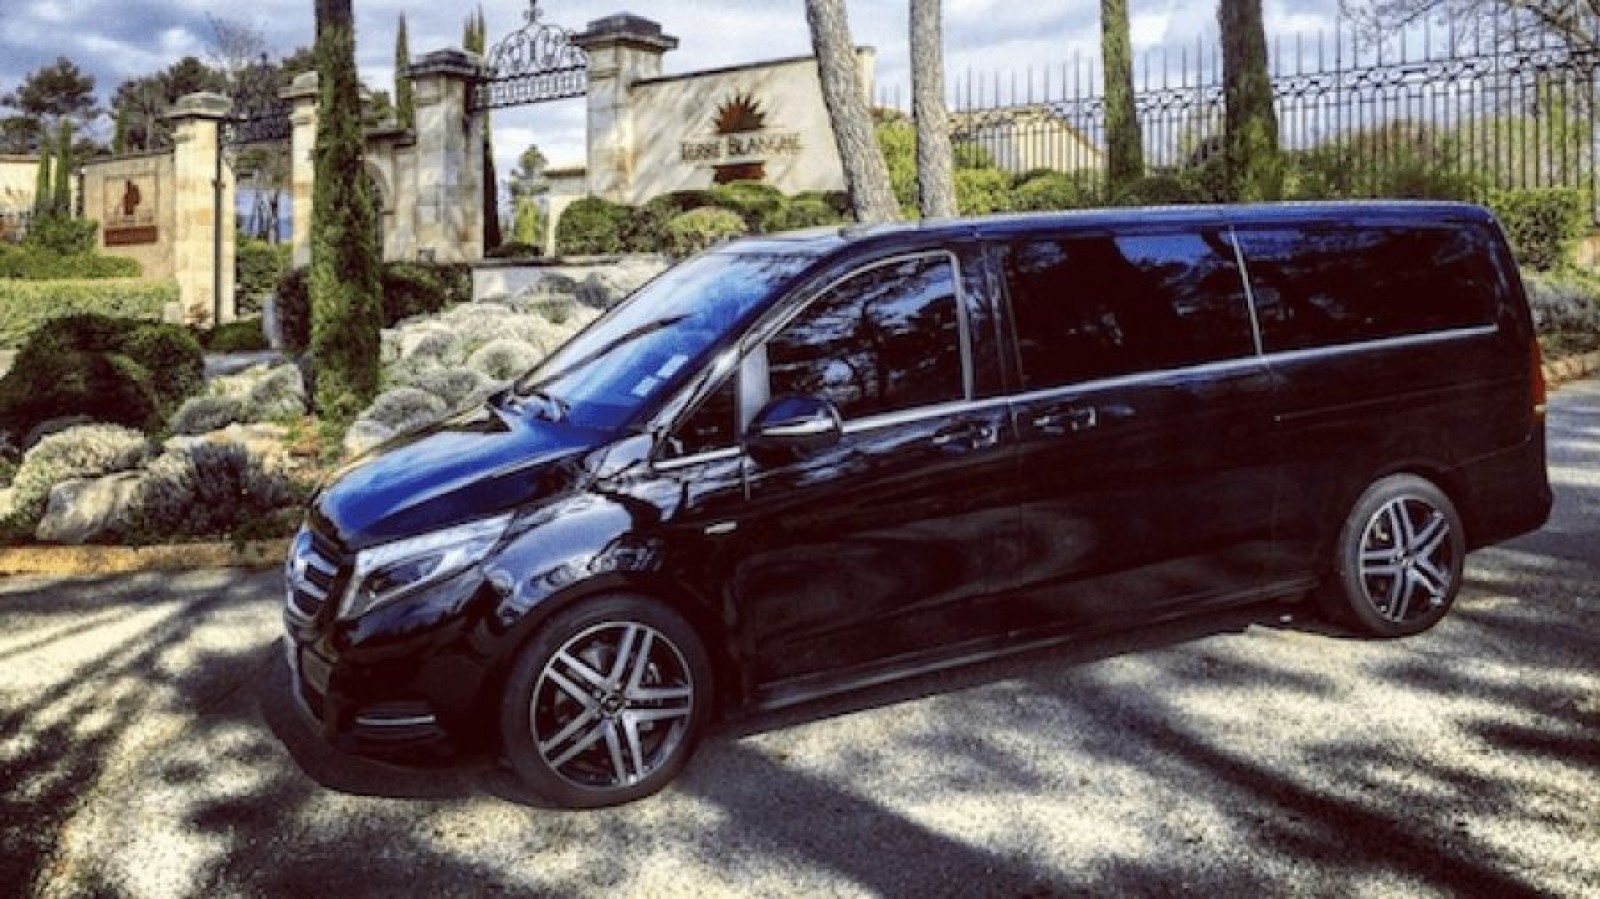 Private Chauffeur in Antibes - Premium Vehicles & Services - Reactivity 24/7 - Ruby Services - Car Rental with Driver in Antibes